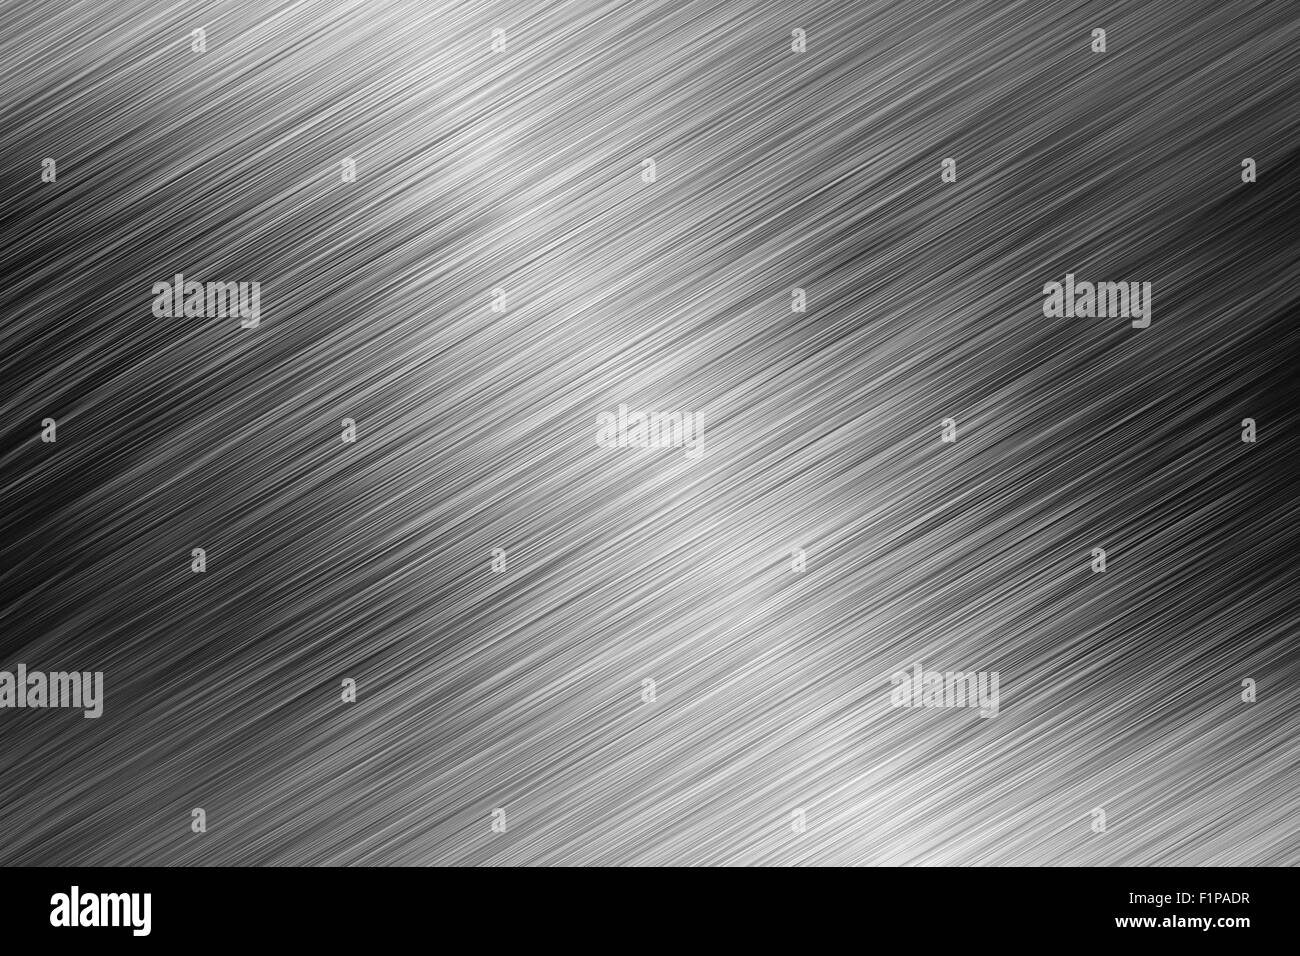 Shiny Metal Background. Metallic Material Linear Polished. Stock Photo